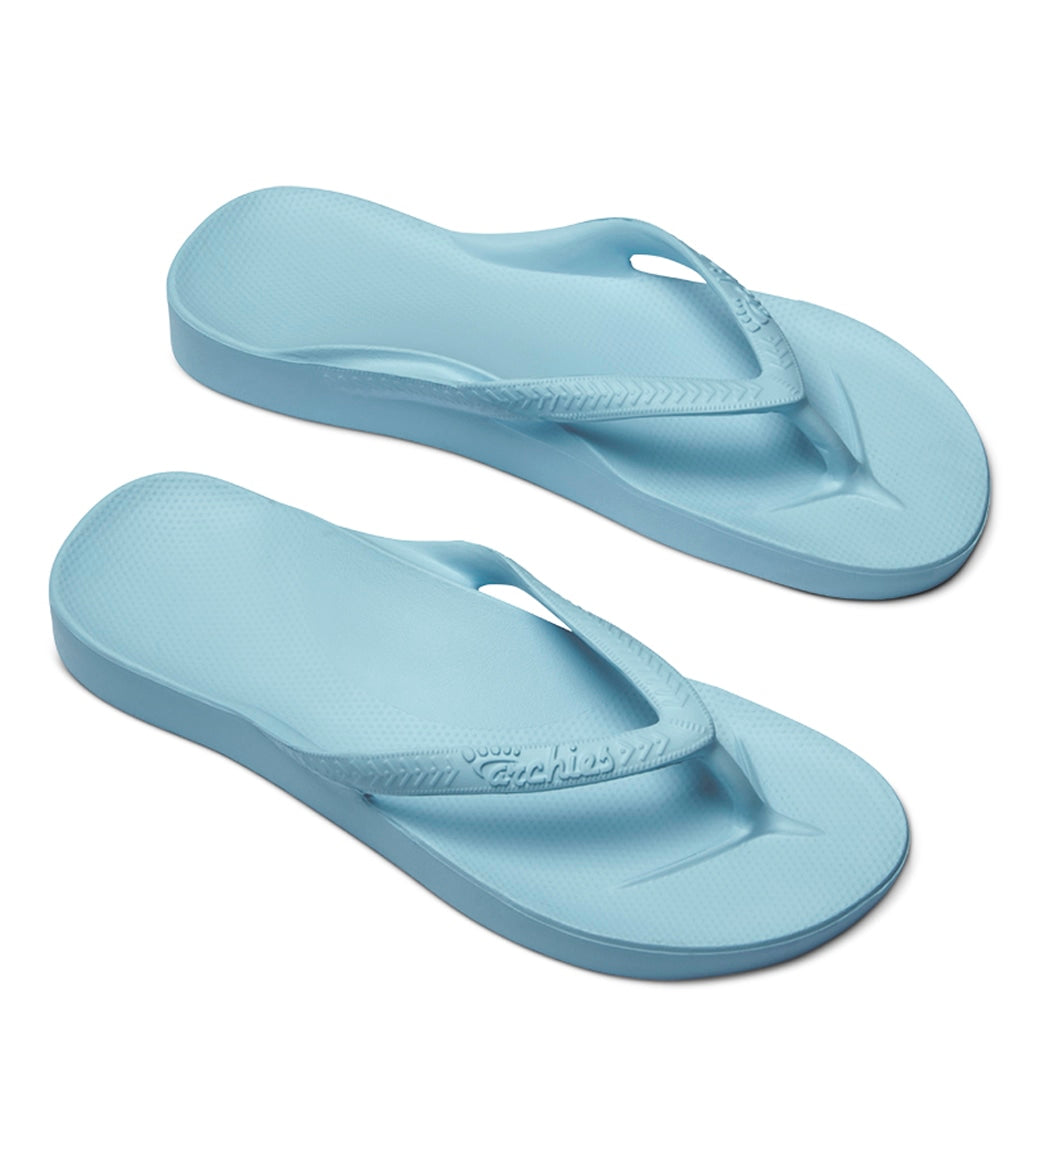 Chris Morey Podiatry - Archies arch support thongs